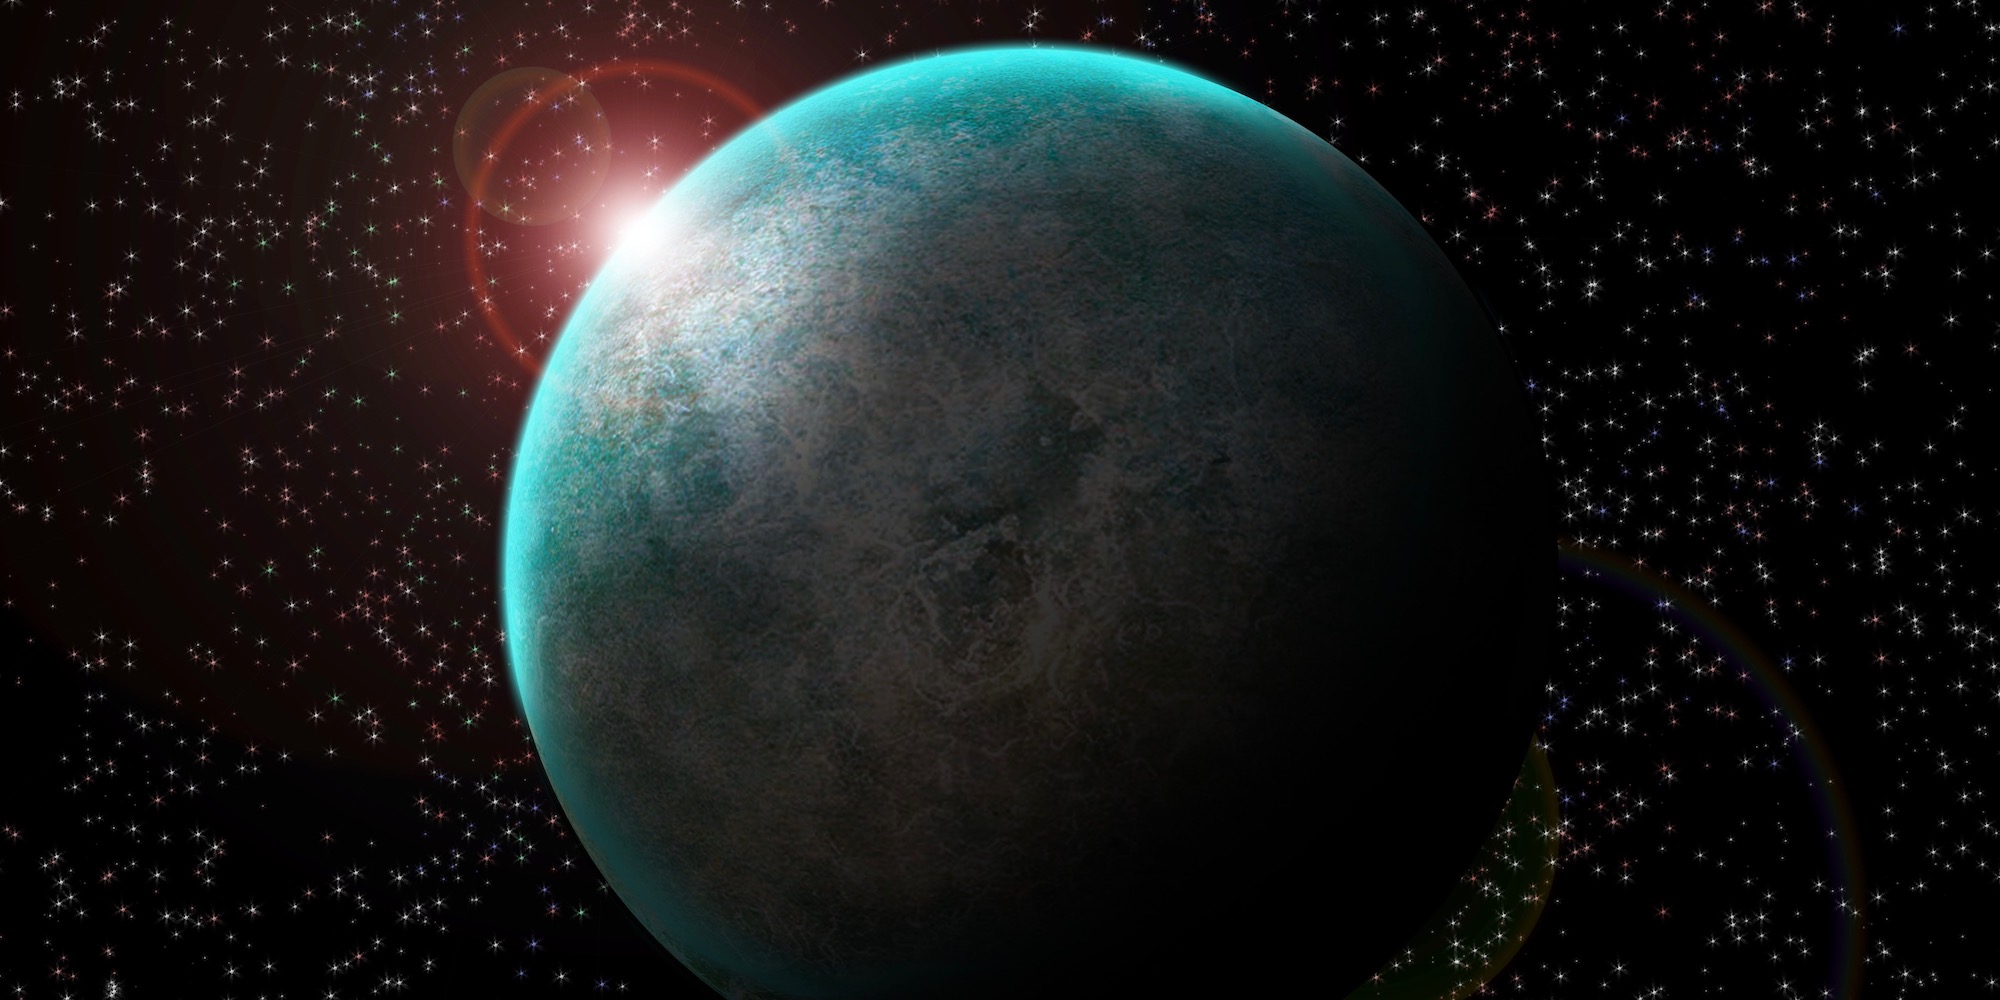 Tutorial: How to make nice and simple exoplanets artist’s impressions